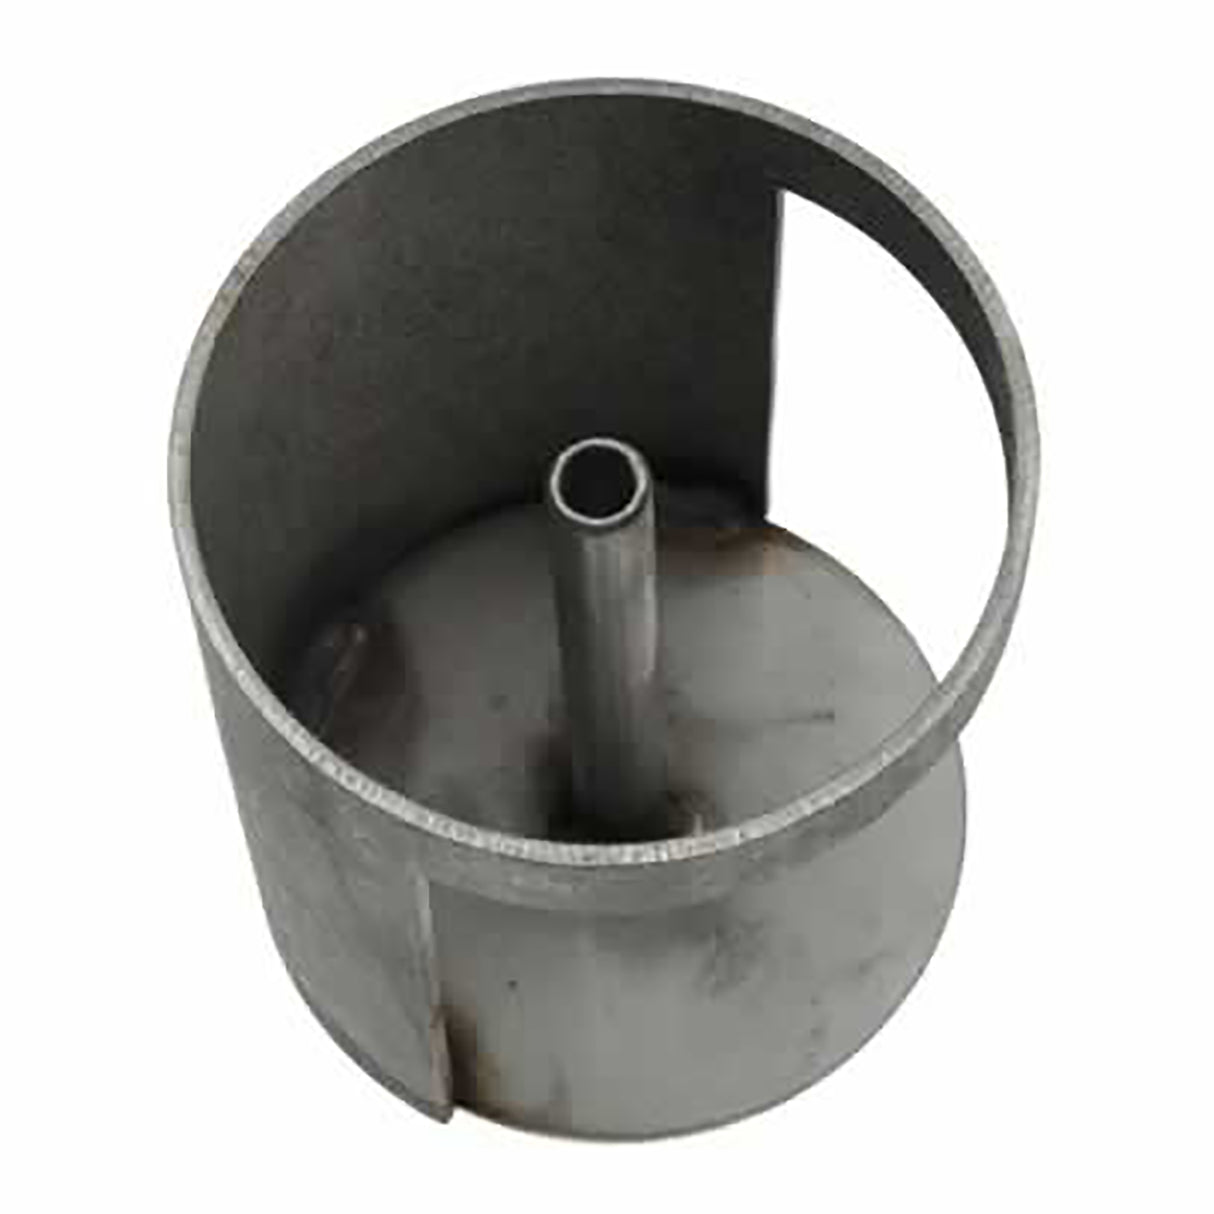 Discharge stainless steel feeding